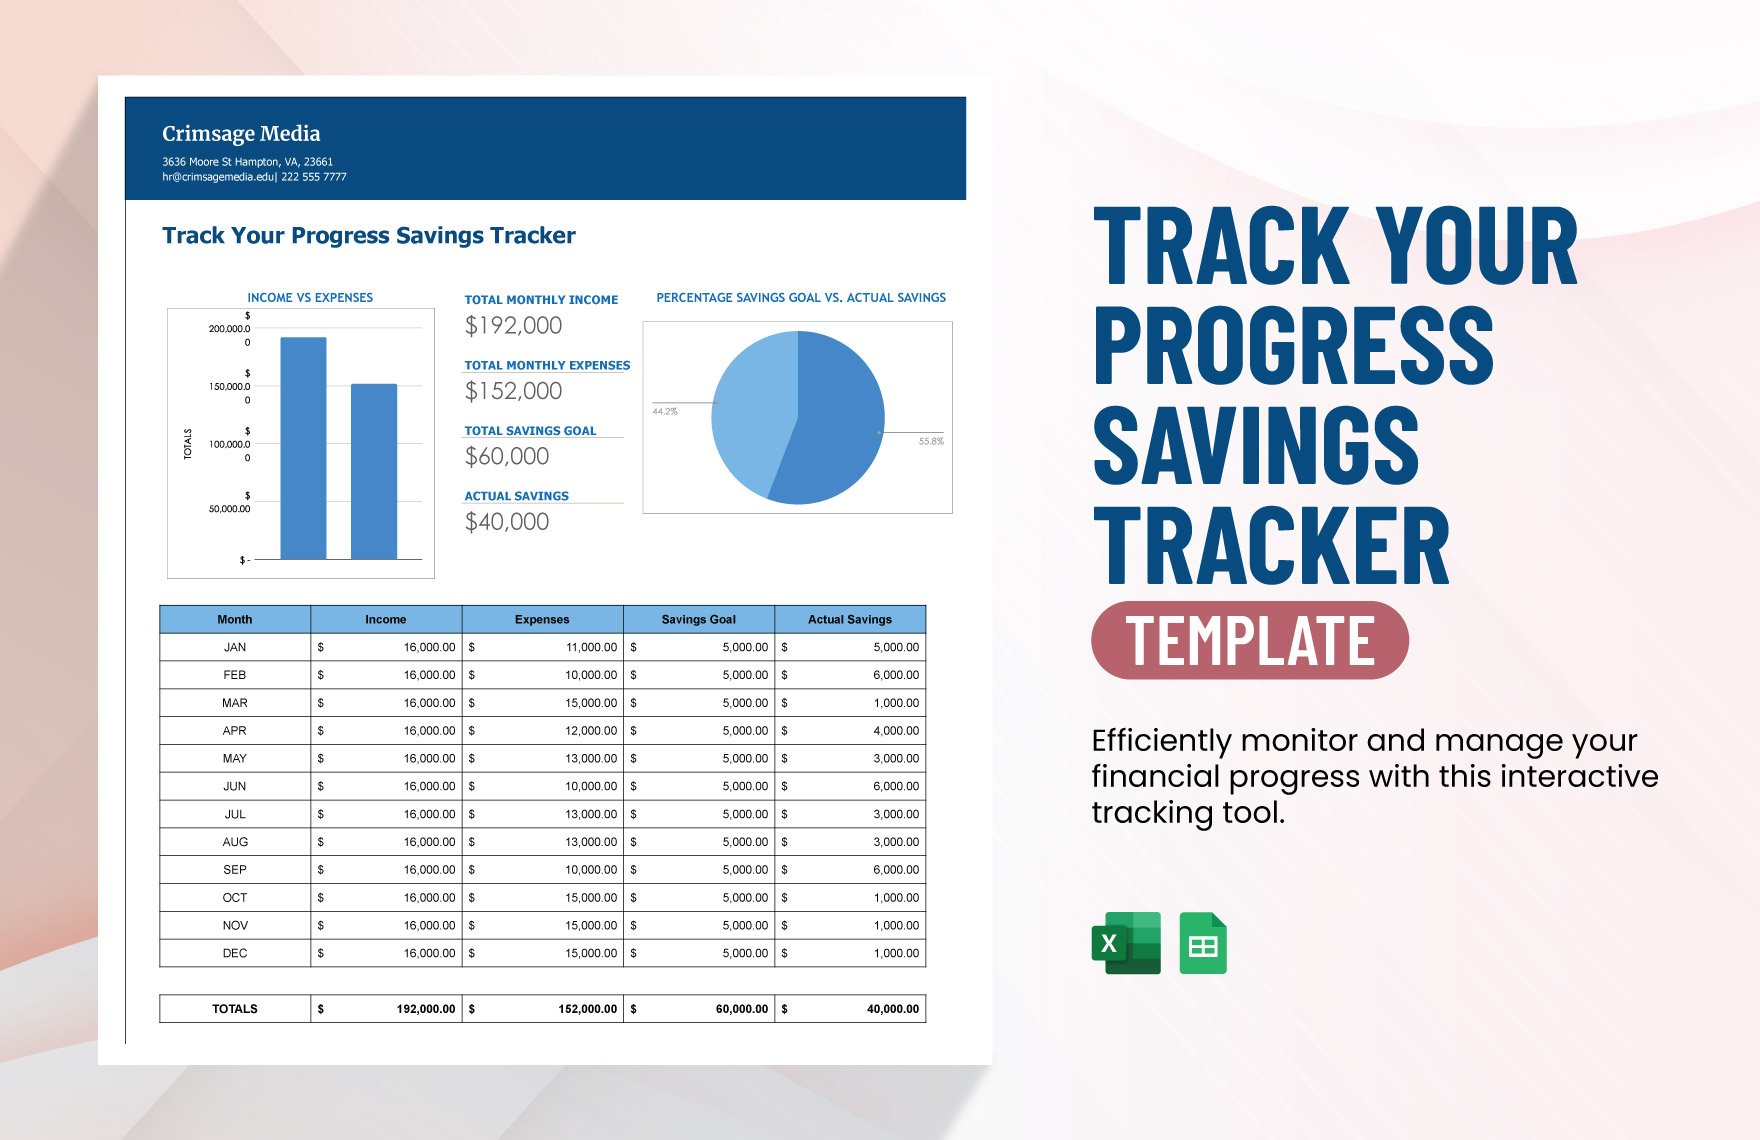 Track Your Progress Savings Tracker Template in Excel, Google Sheets